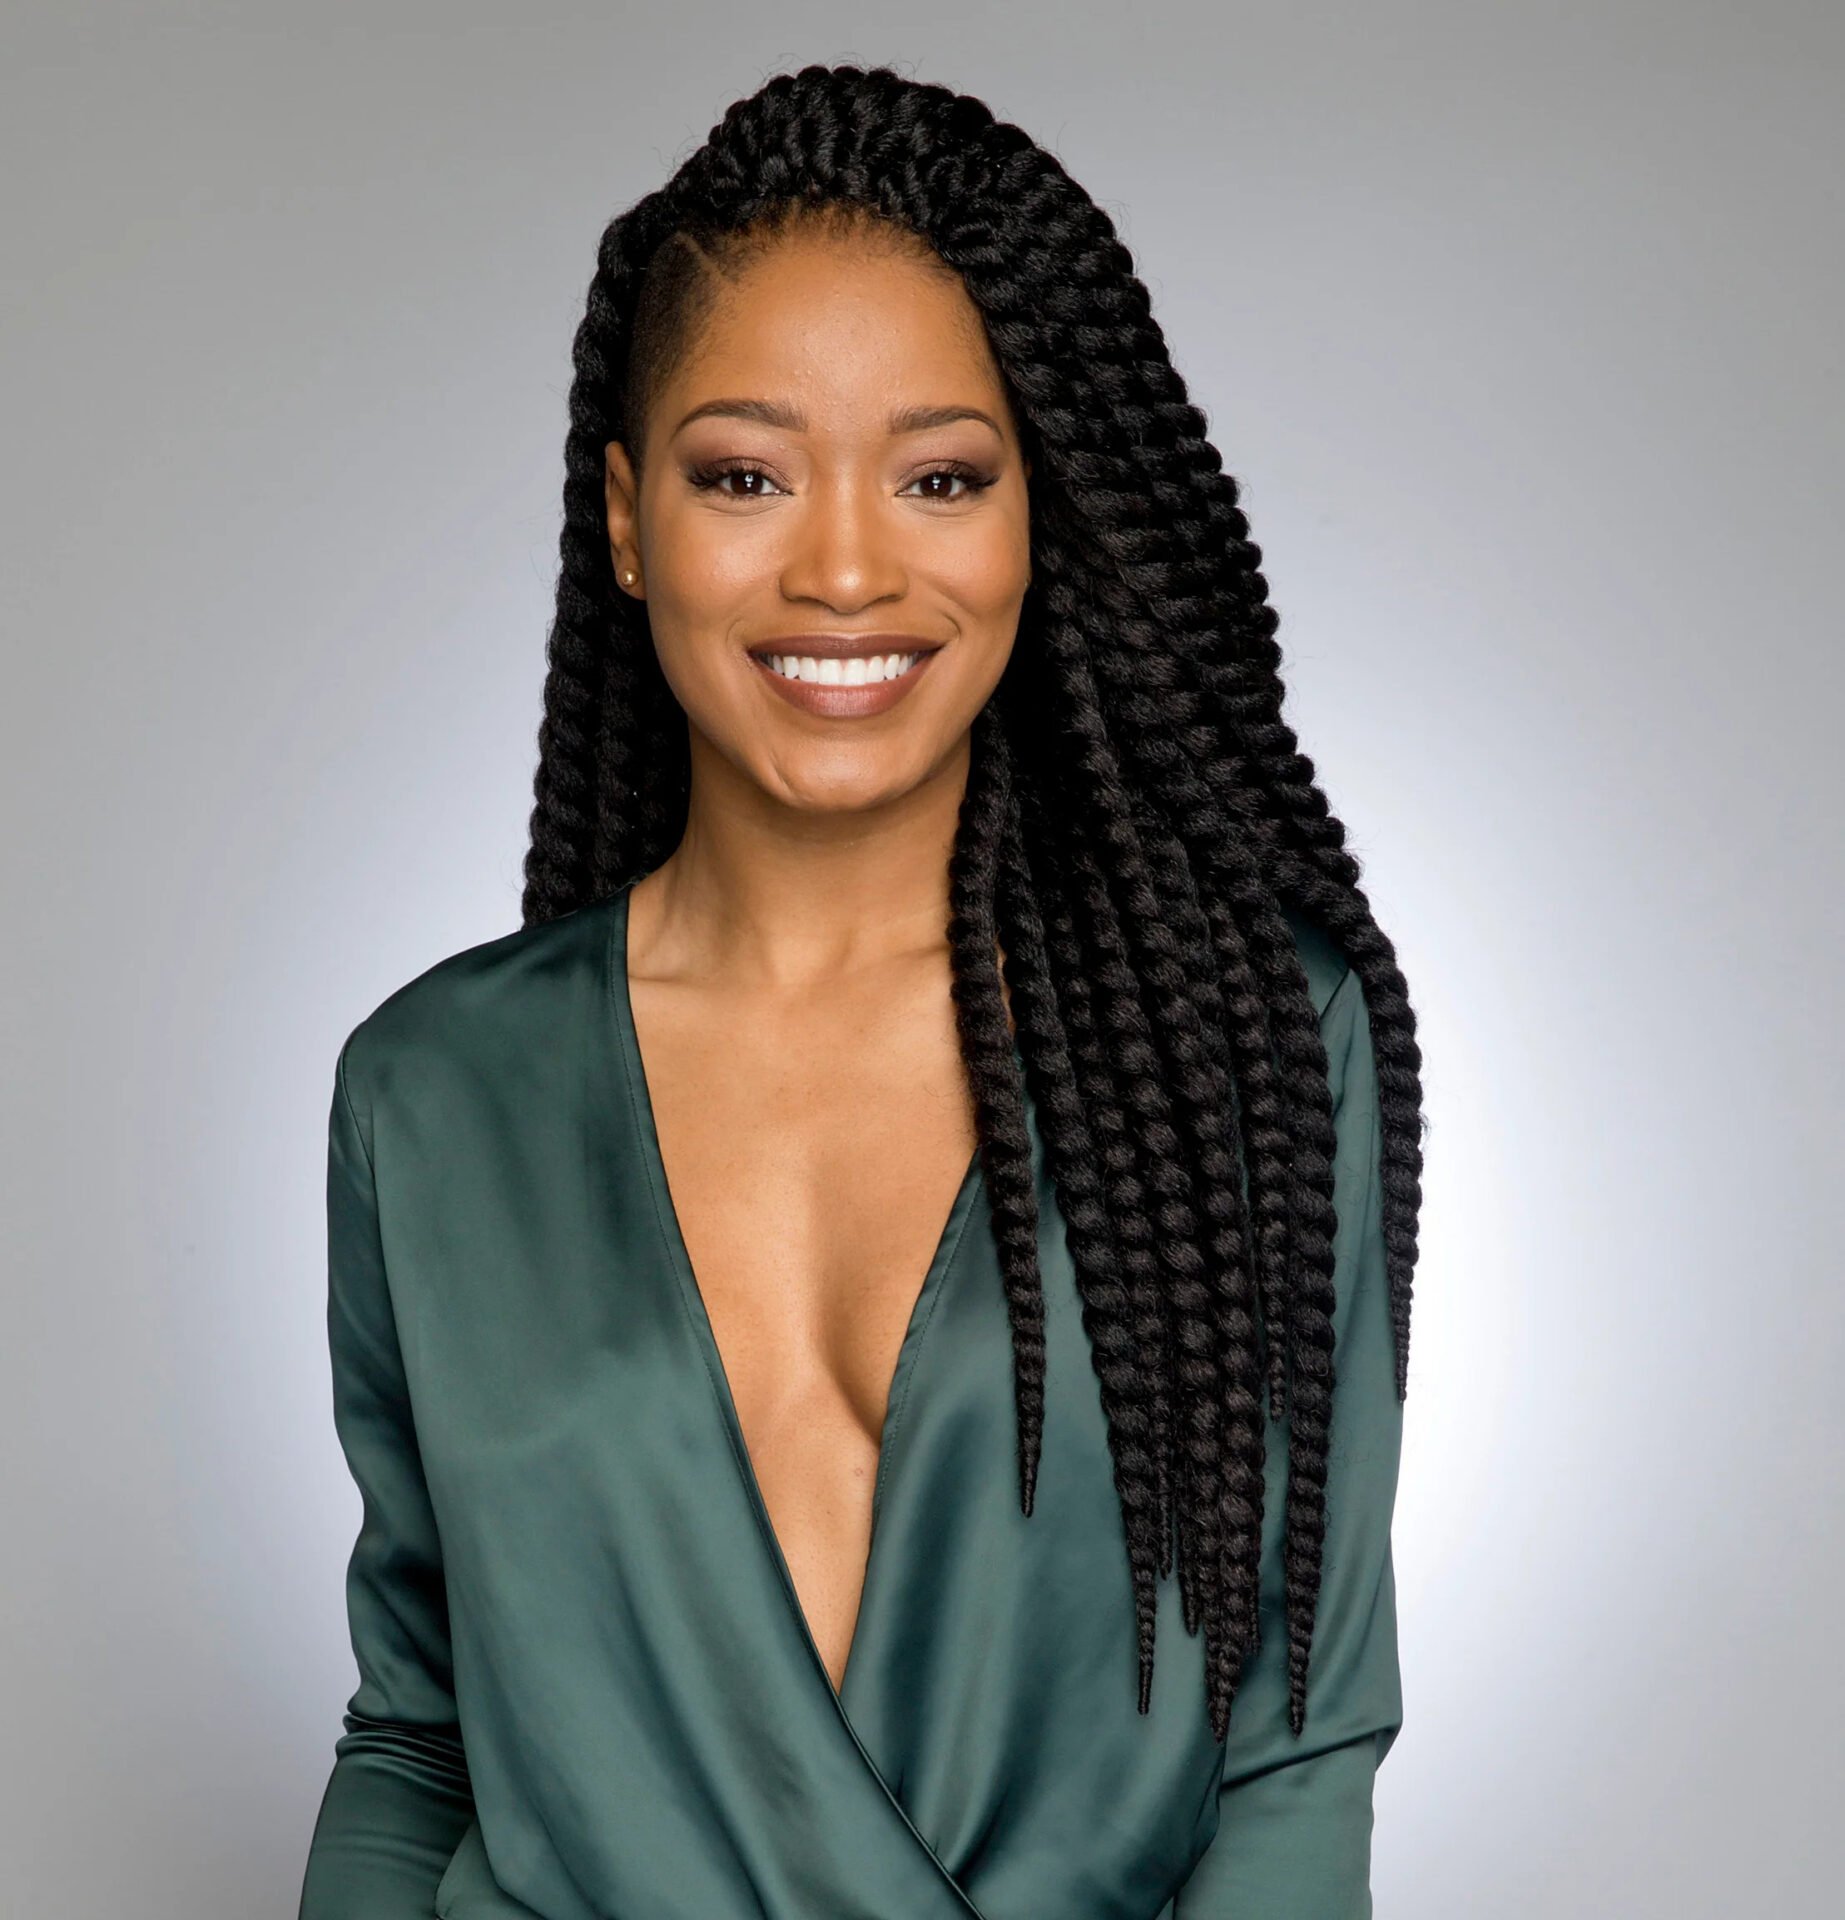 GET A LOOK BEHIND THE SCENES OF KEKE PALMER'S FUN AND NOSTALGIC SHOOT FOR "BOTTOMS UP 2.0"